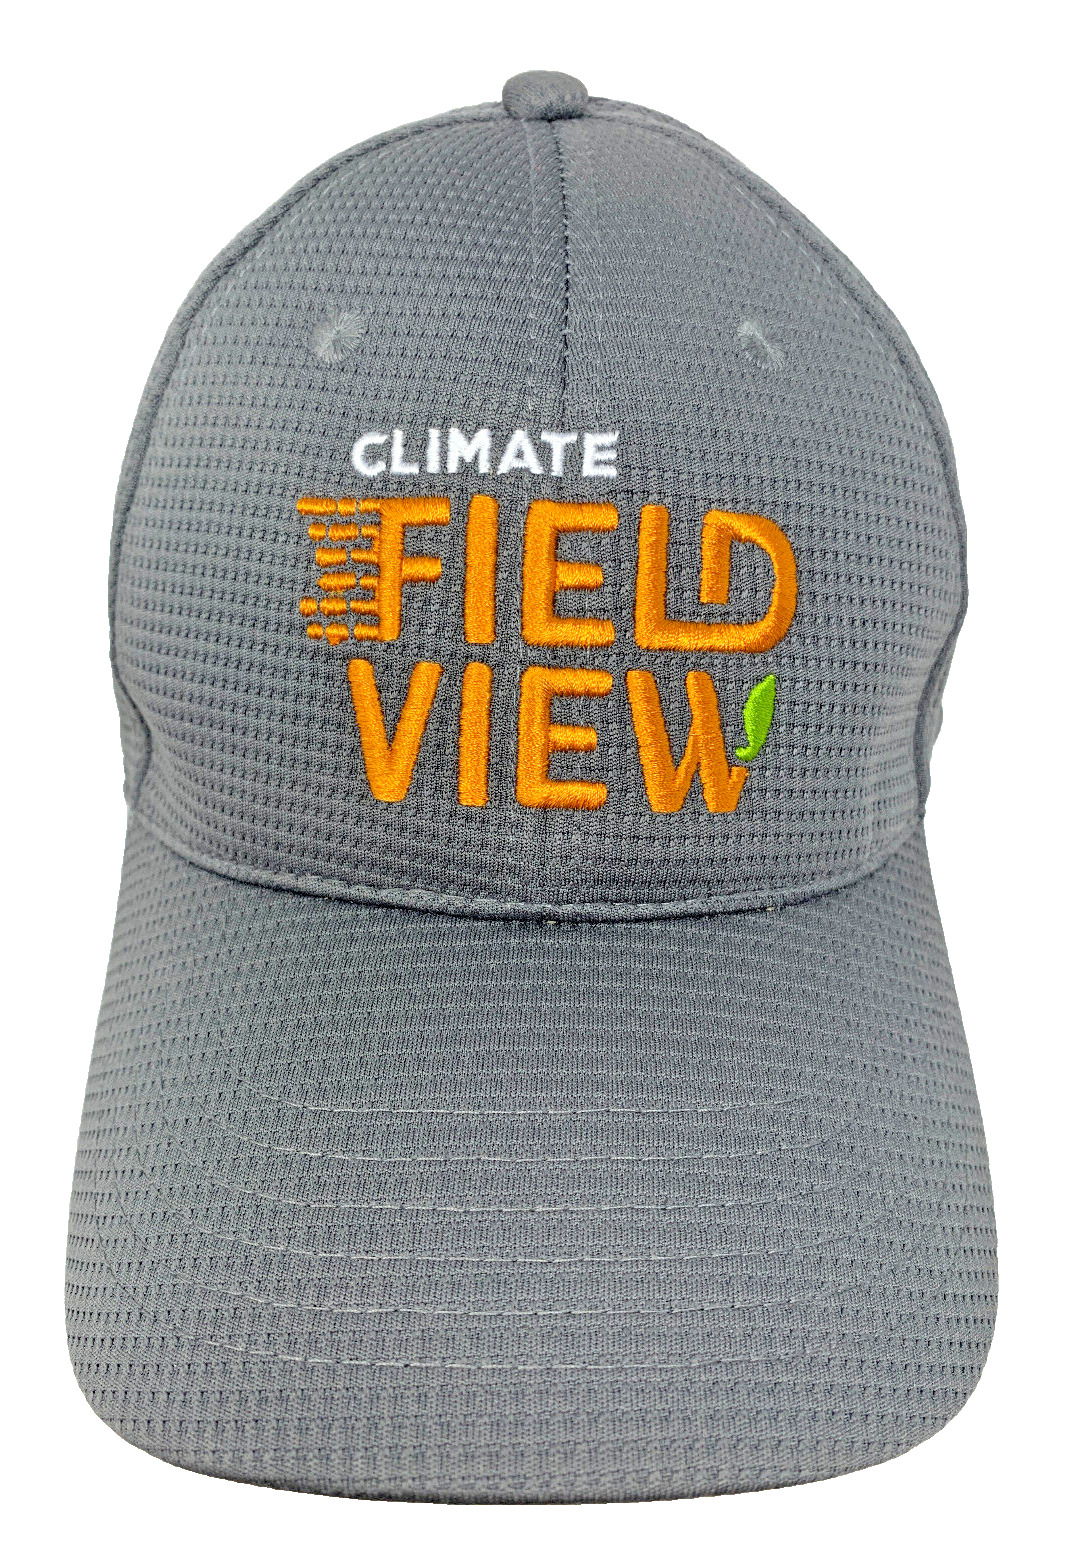 Climate Fieldview Gray Hat Cap w/ Embroidered Logo K-Products Adjustable NEW